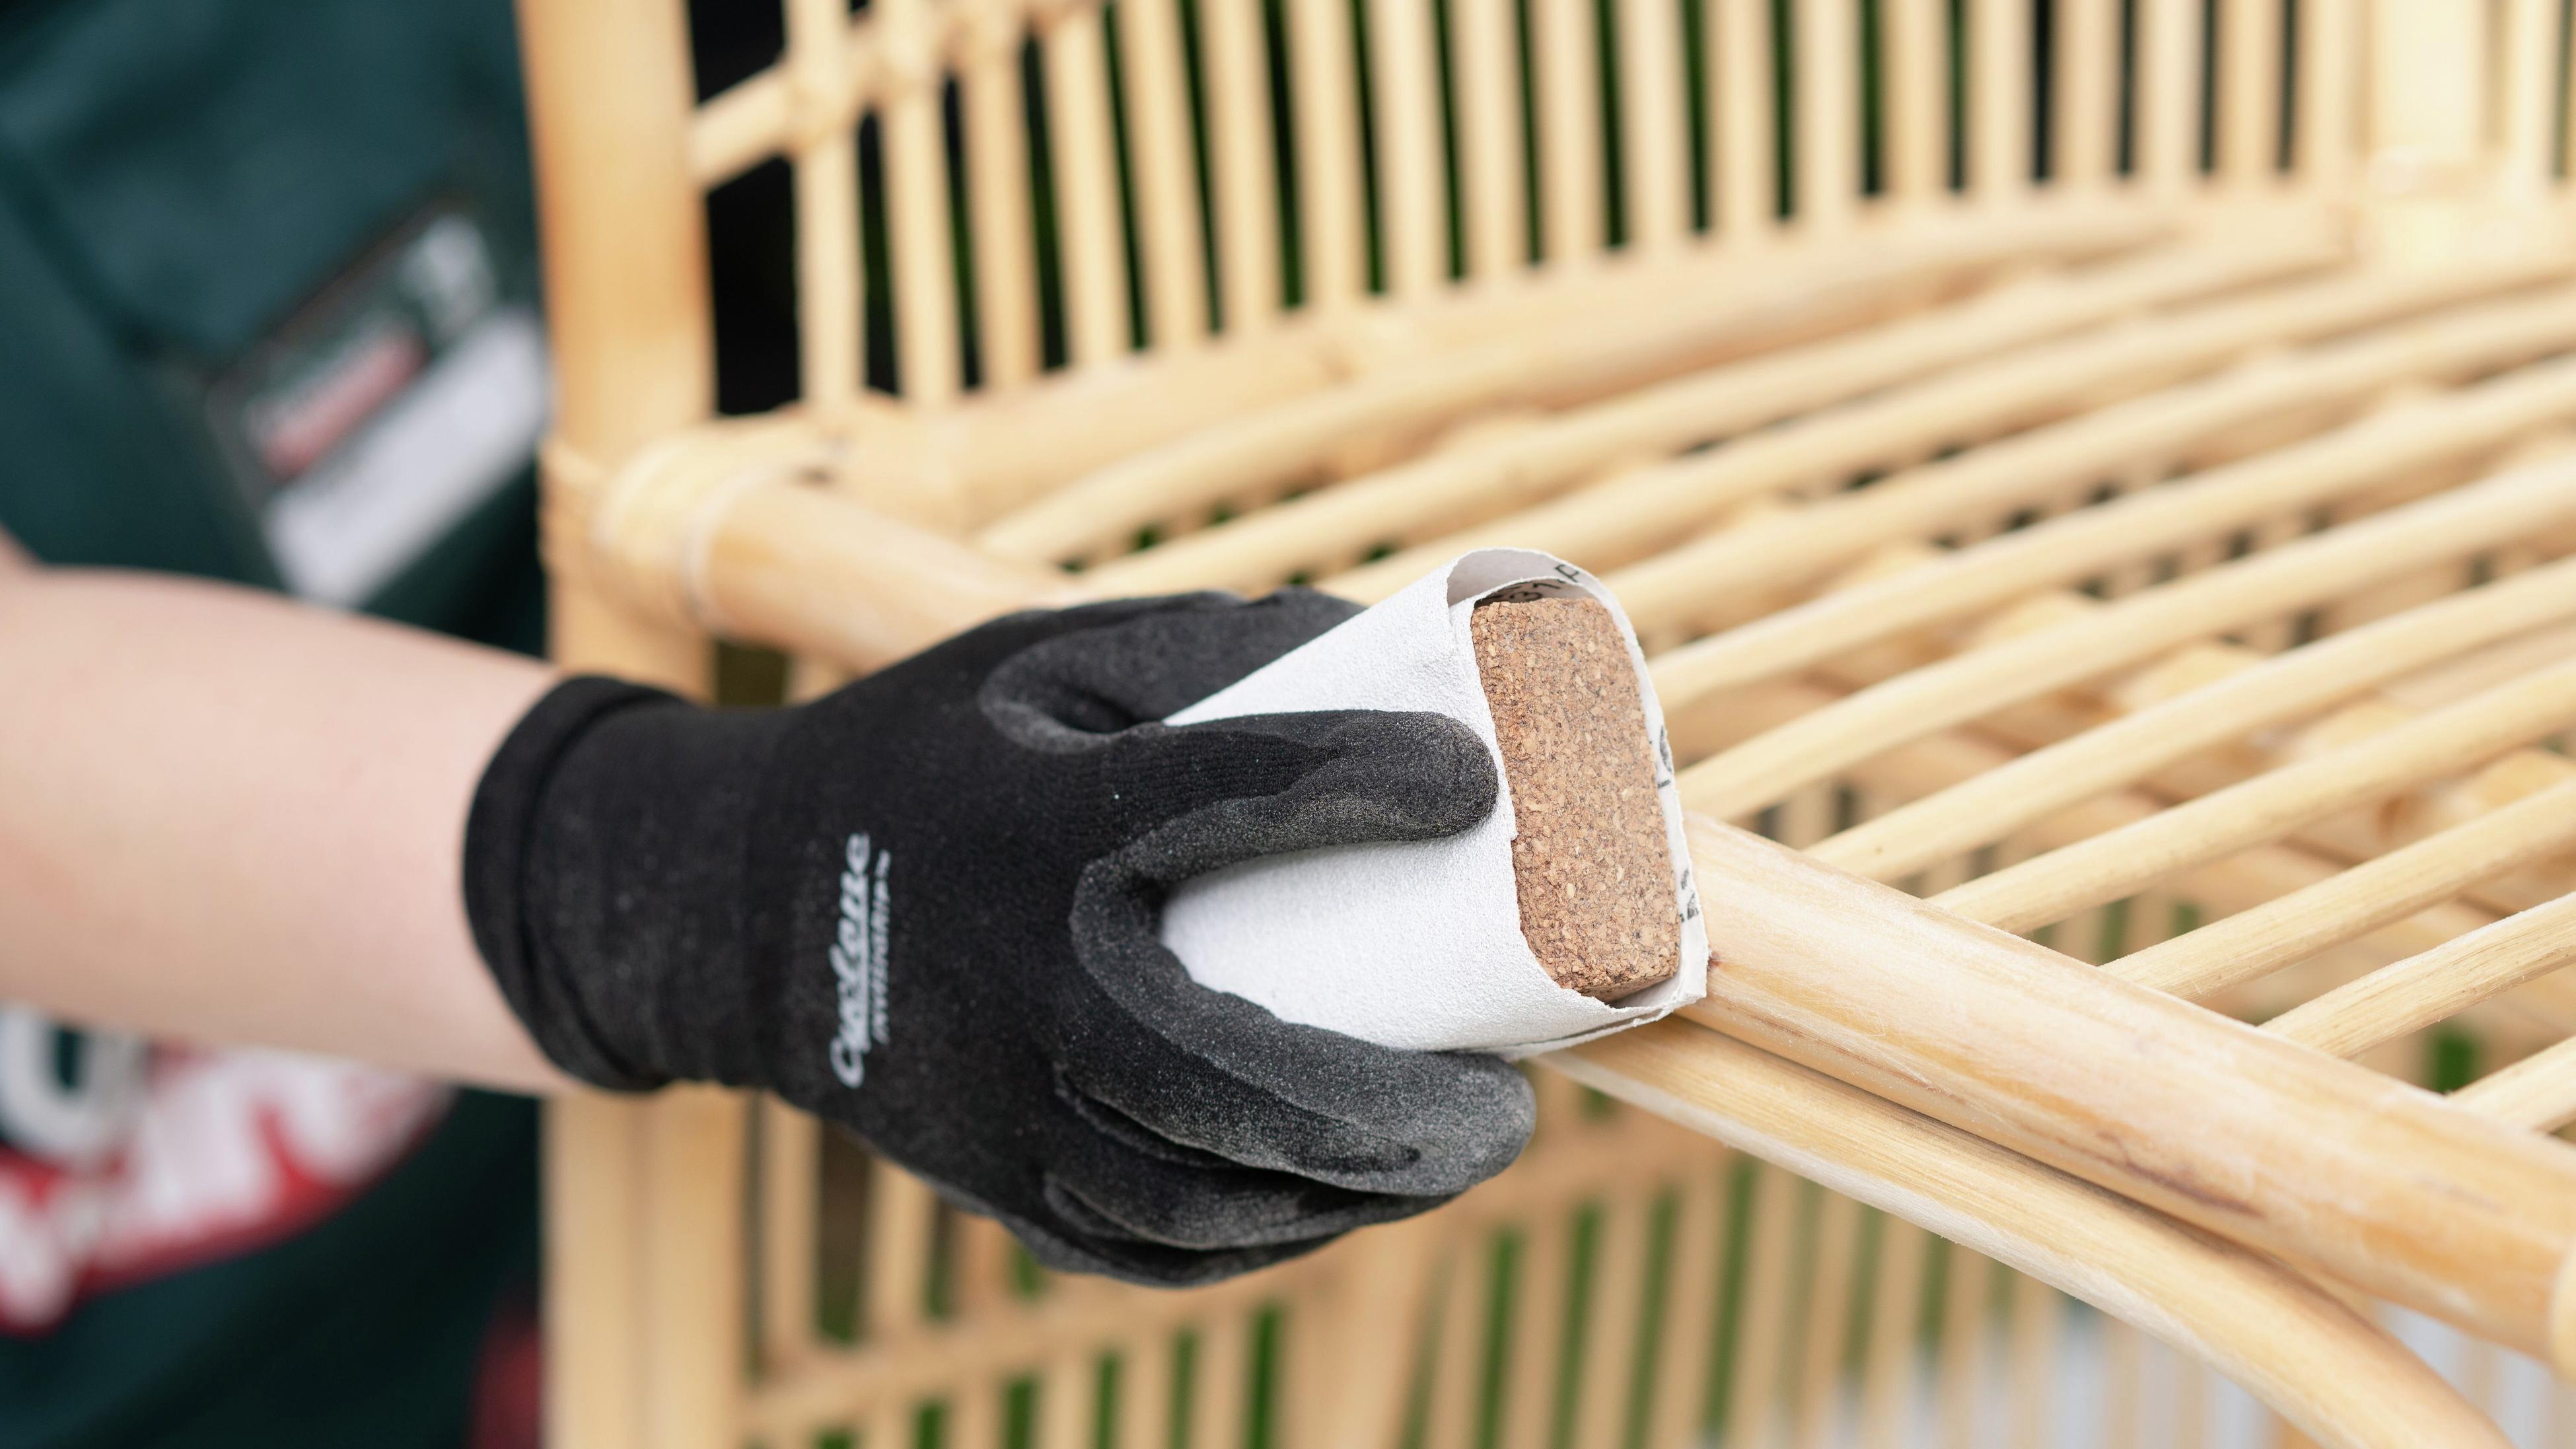 Person wearing safety gloves while sanding the wicker chair with sandpaper and sanding block.